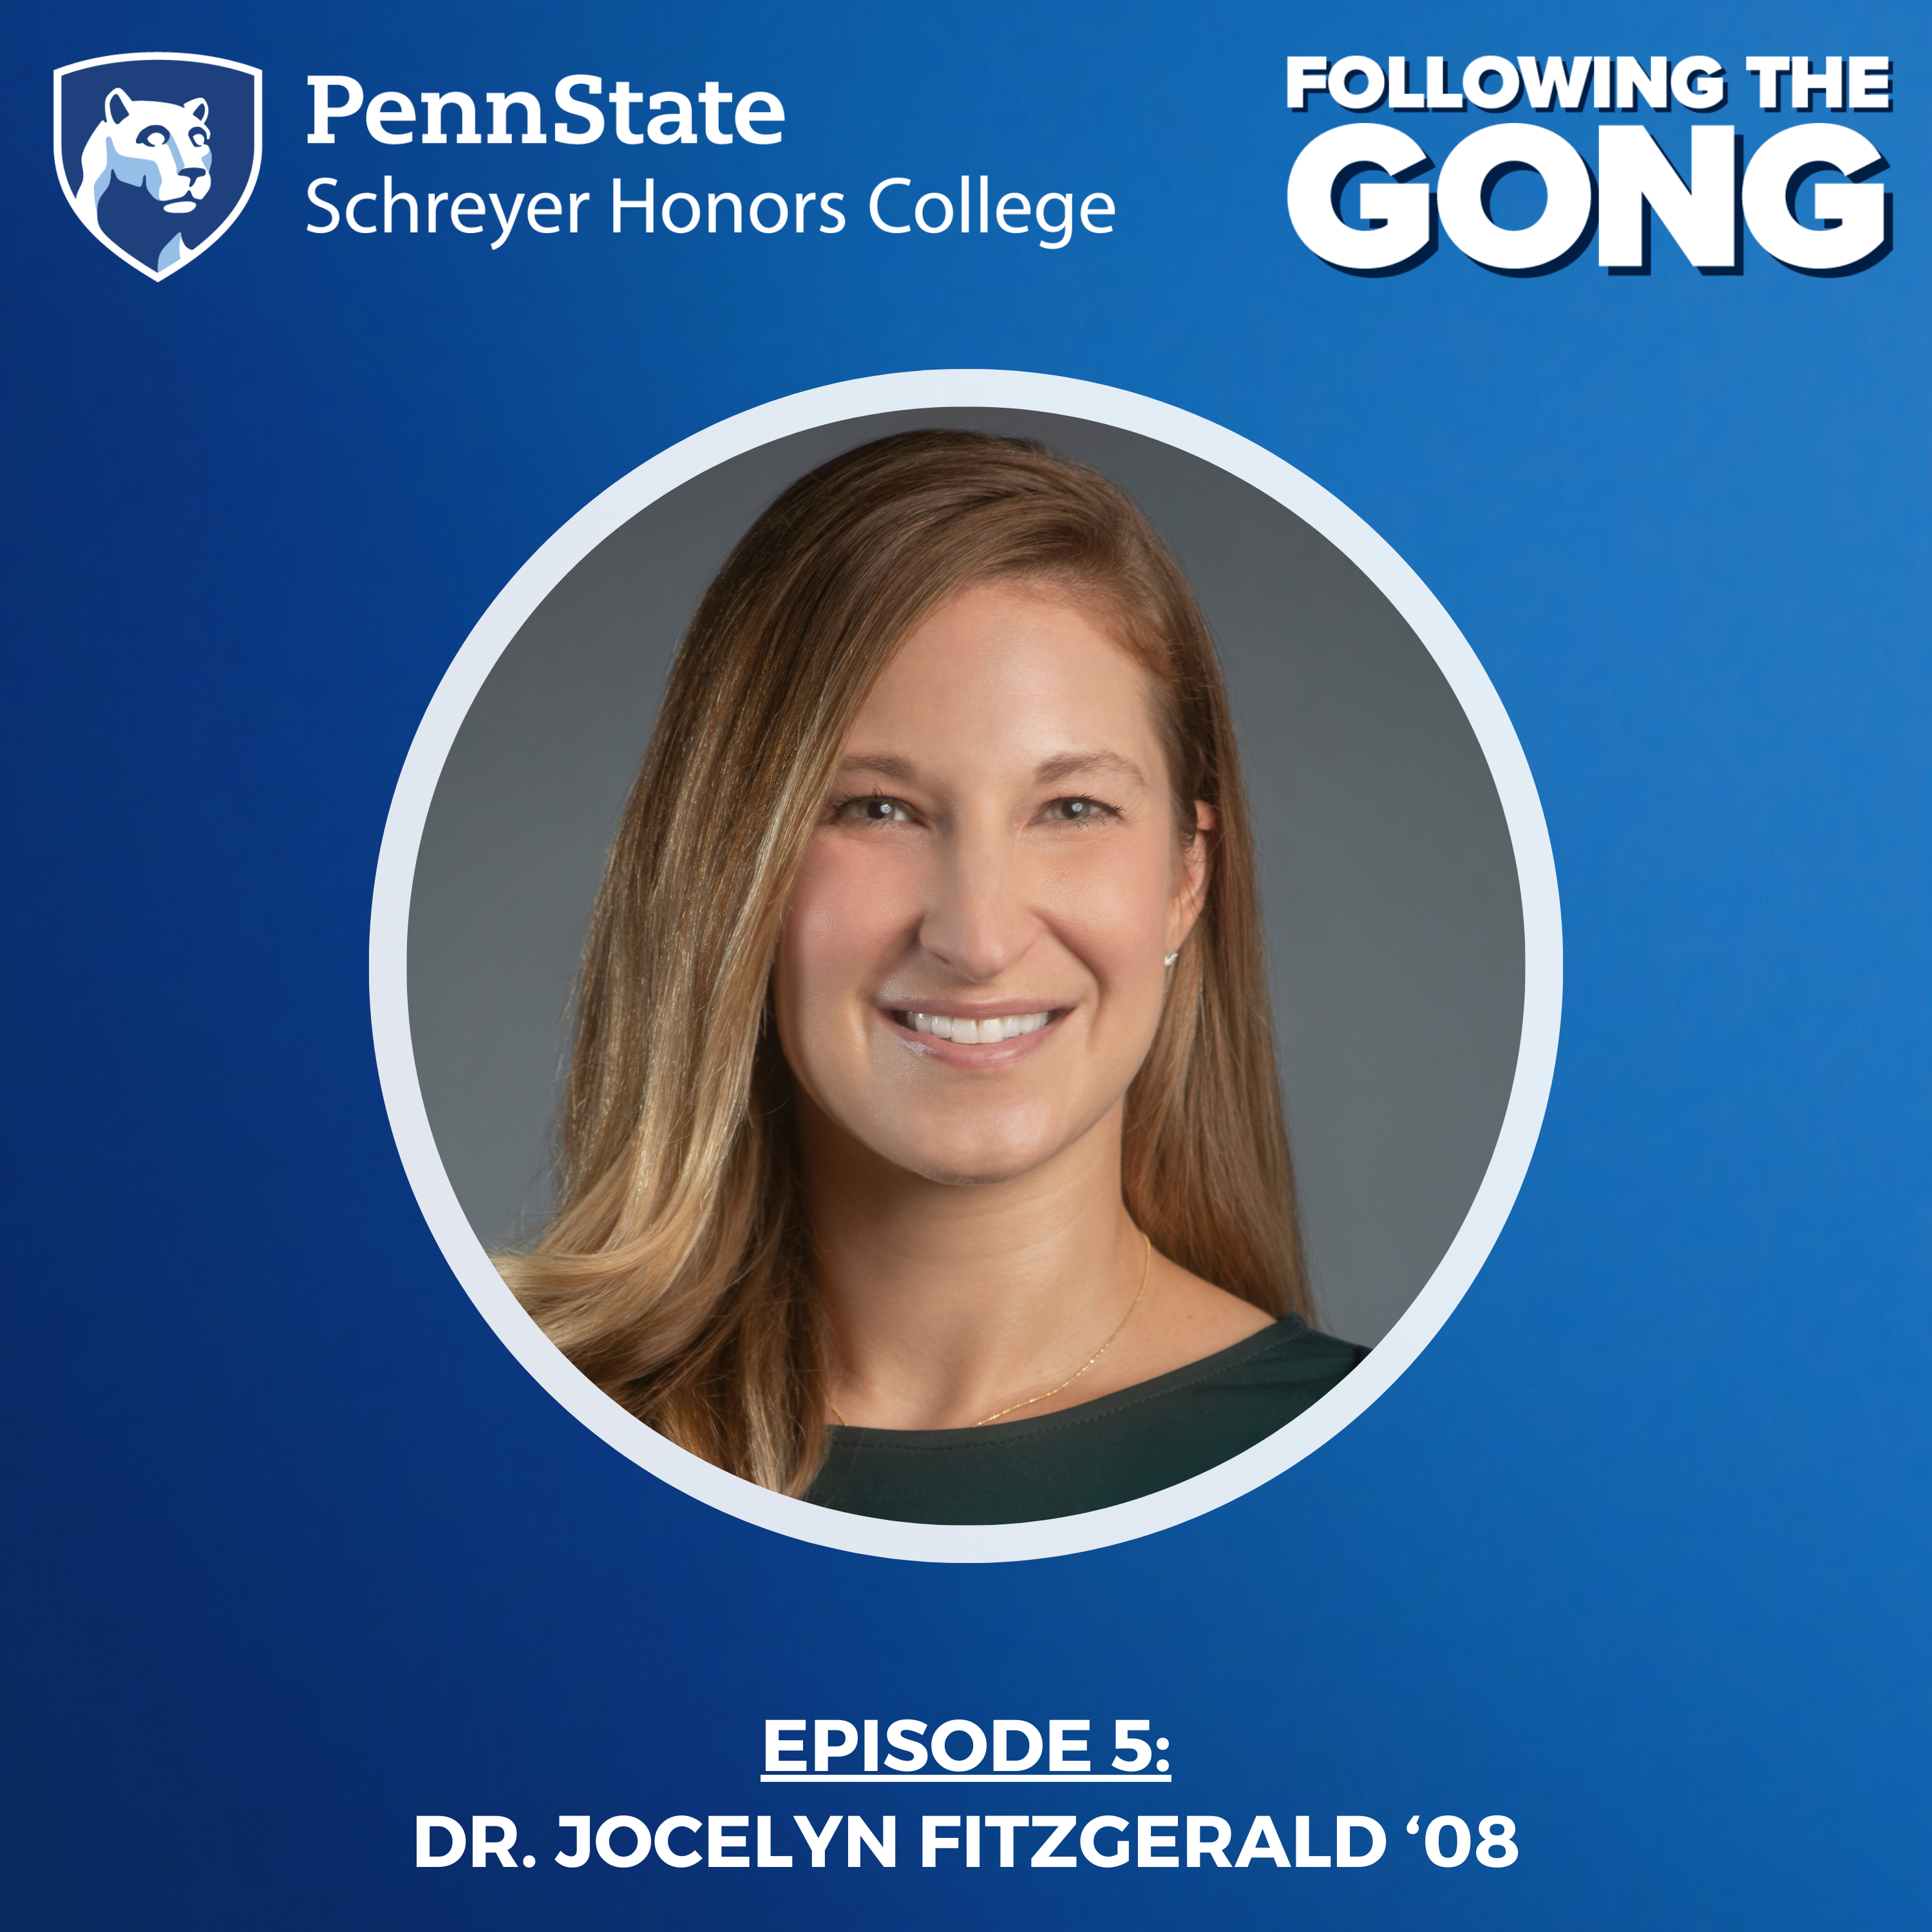 FTG 0005 - Advancing Women's Health with Surgeon and Researcher Dr. Jocelyn Fitzgerald '08